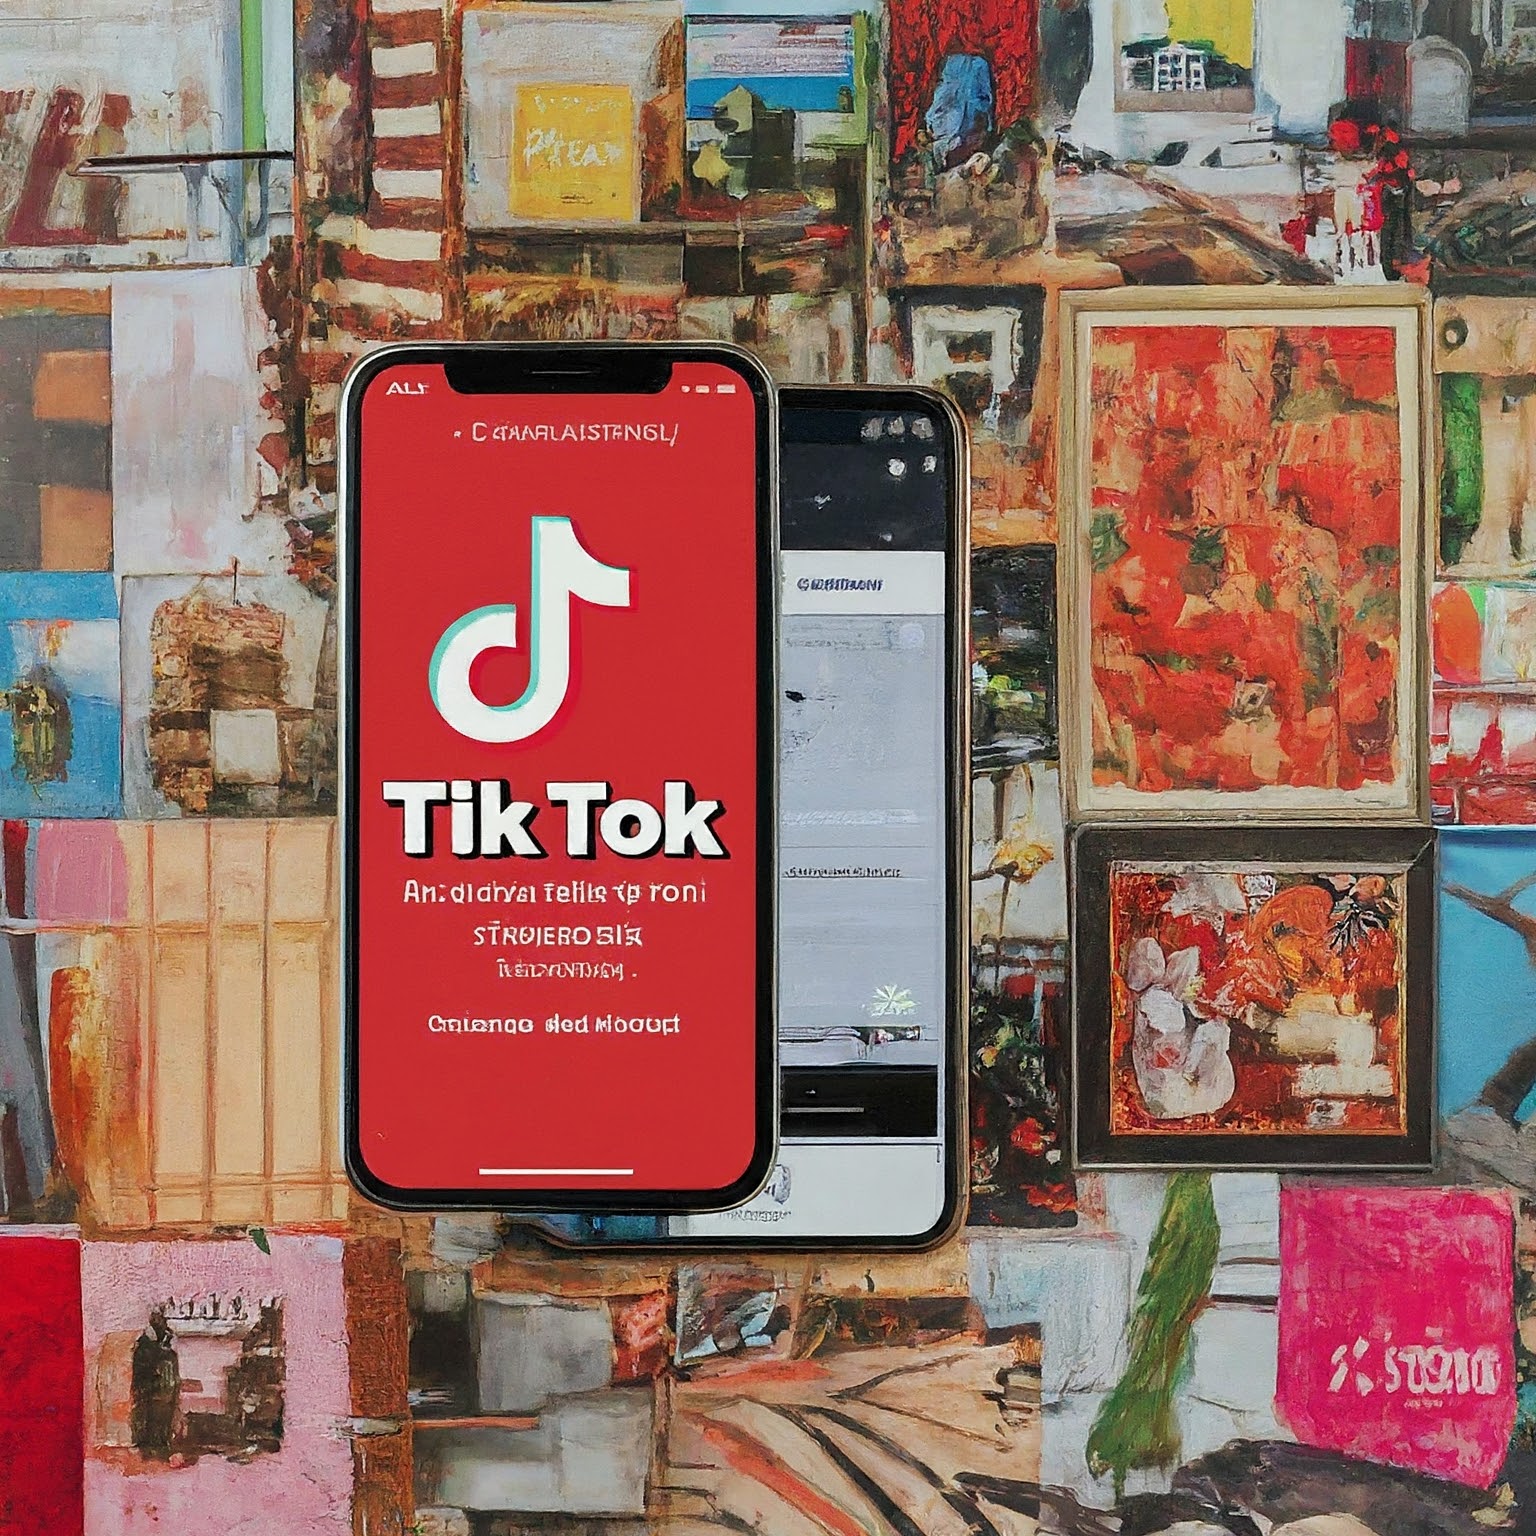 How To Find TikTok Shops in Paterson NJ